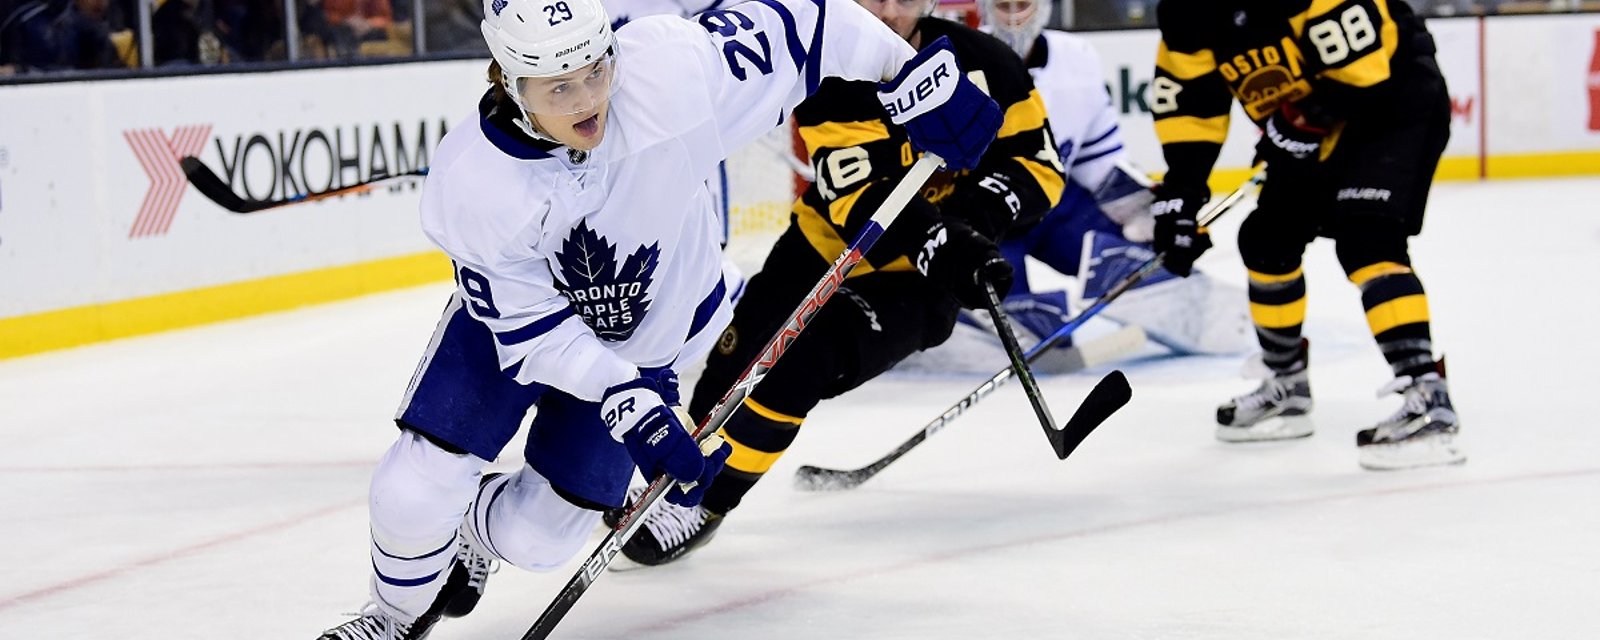 Leafs rookie sets up an ugly goal but earns over $200,000 in the process.